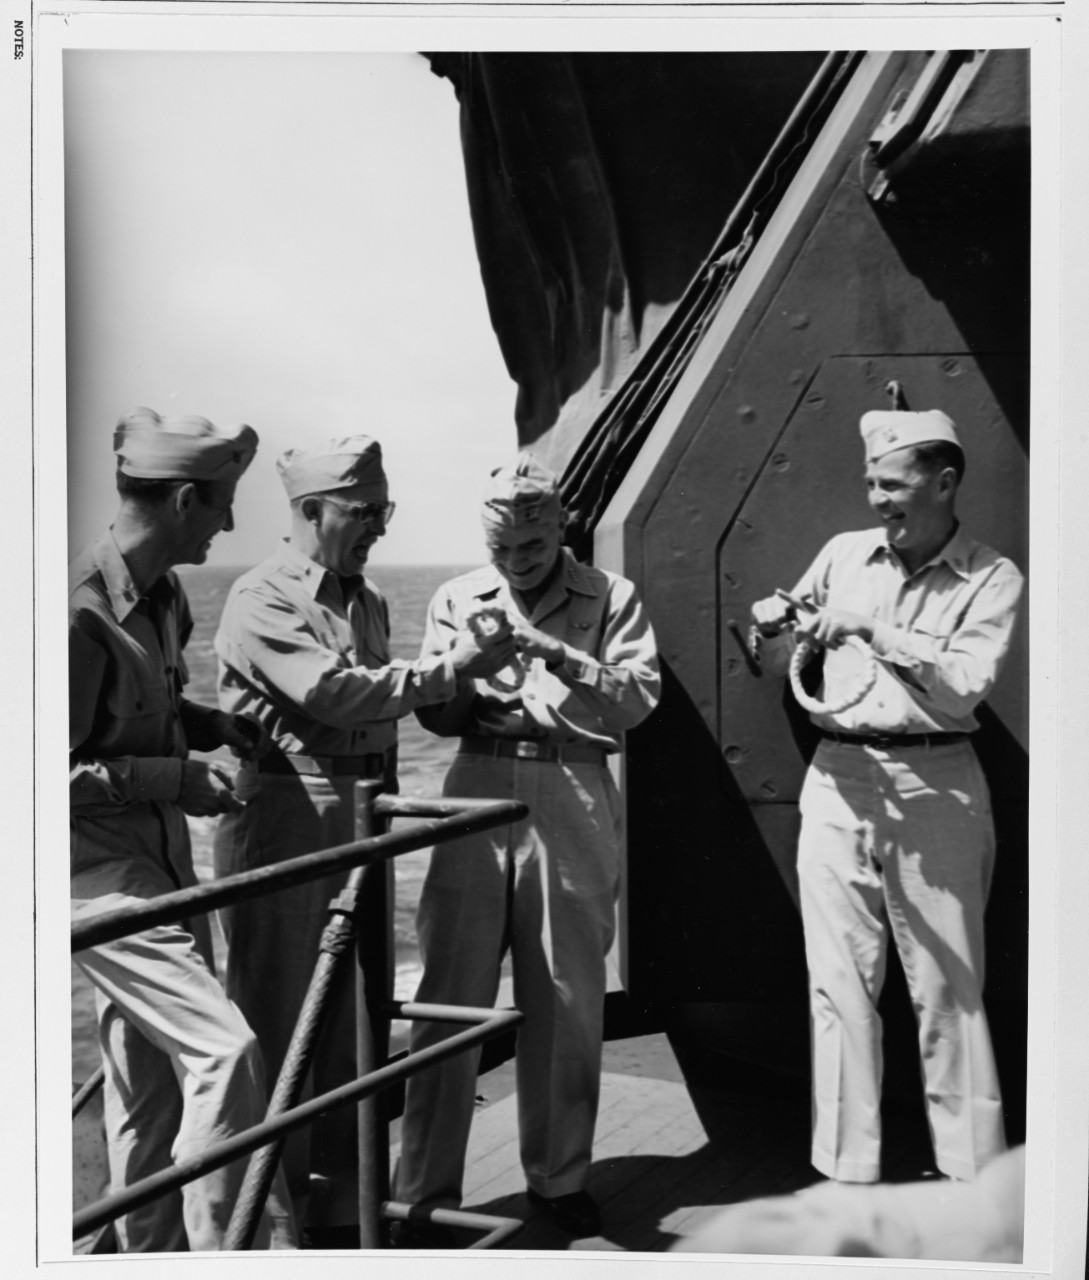 Admiral William F. Halsey, Commander Third Fleet, takes some good natured kidding from his officers aboard USS NEW JERSEY (BB-62)